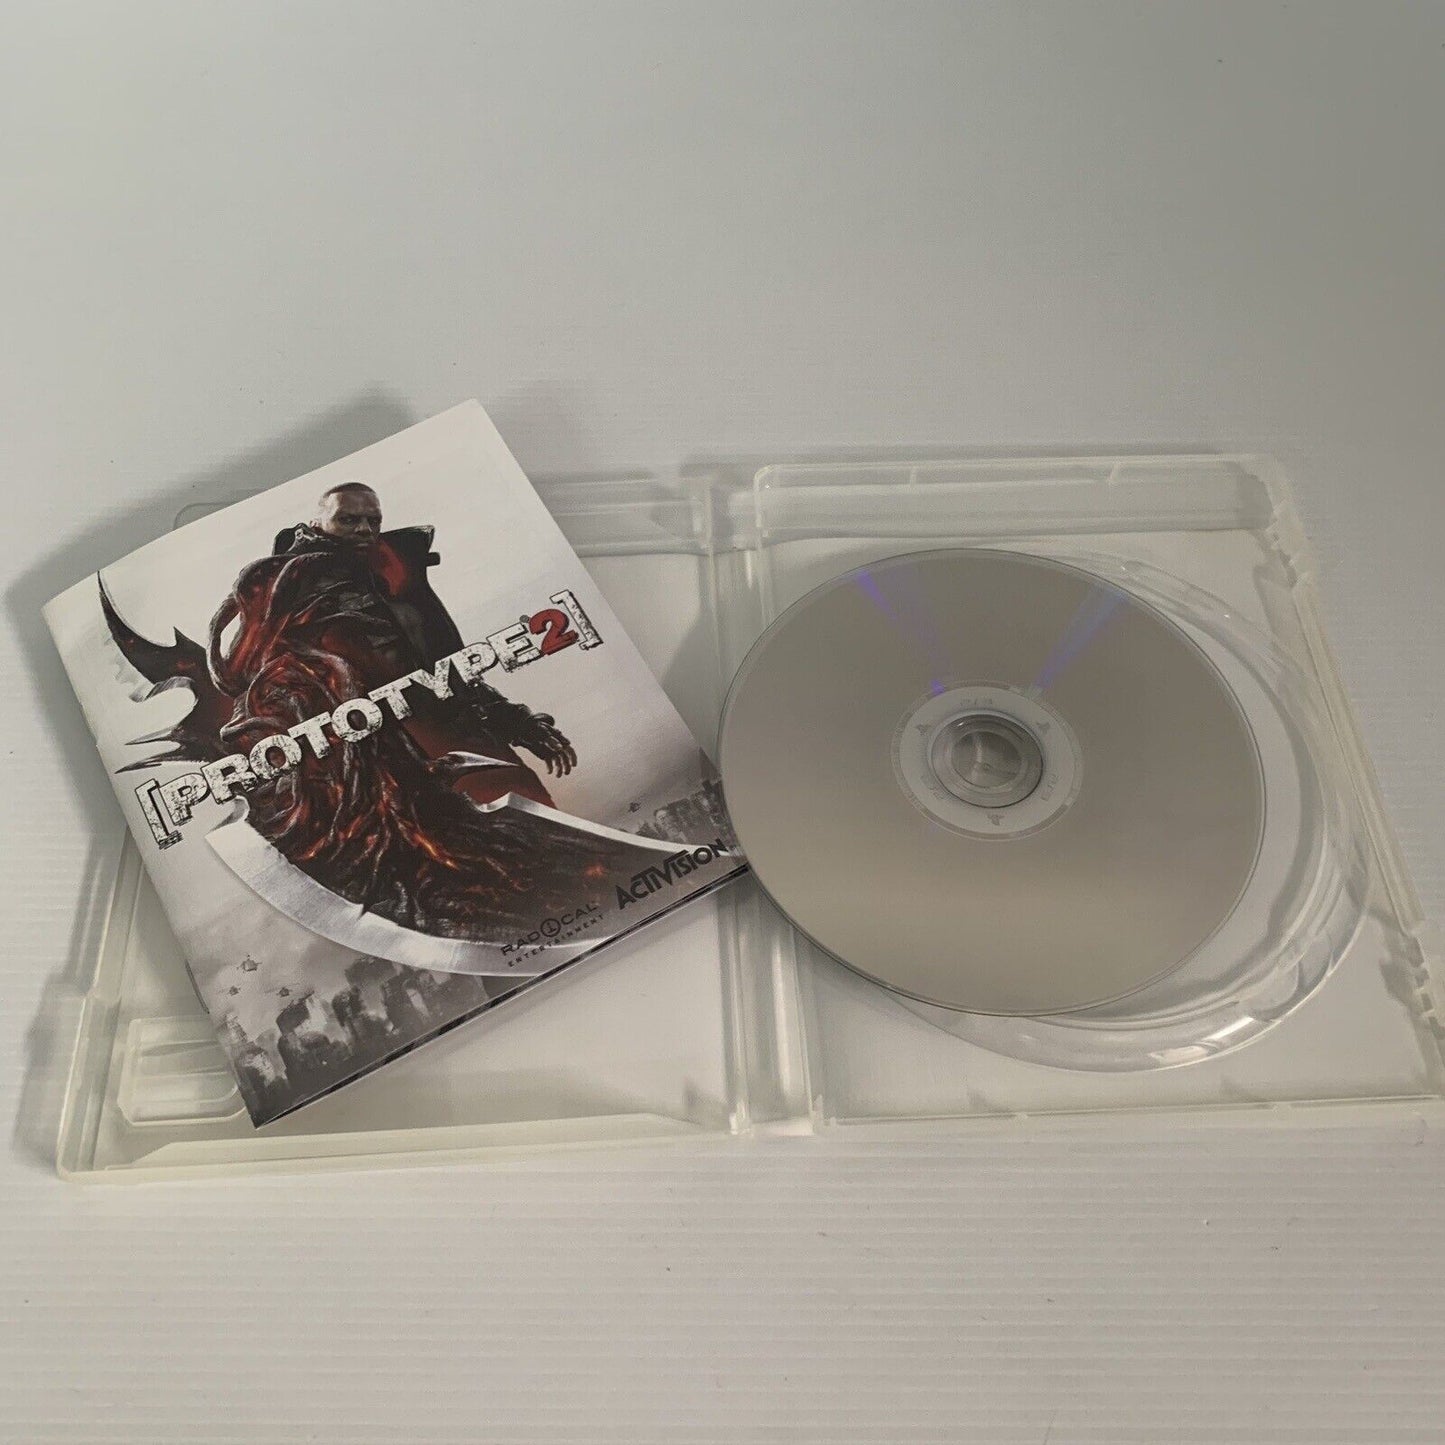 Prototype 2 PlayStation PS3 Game